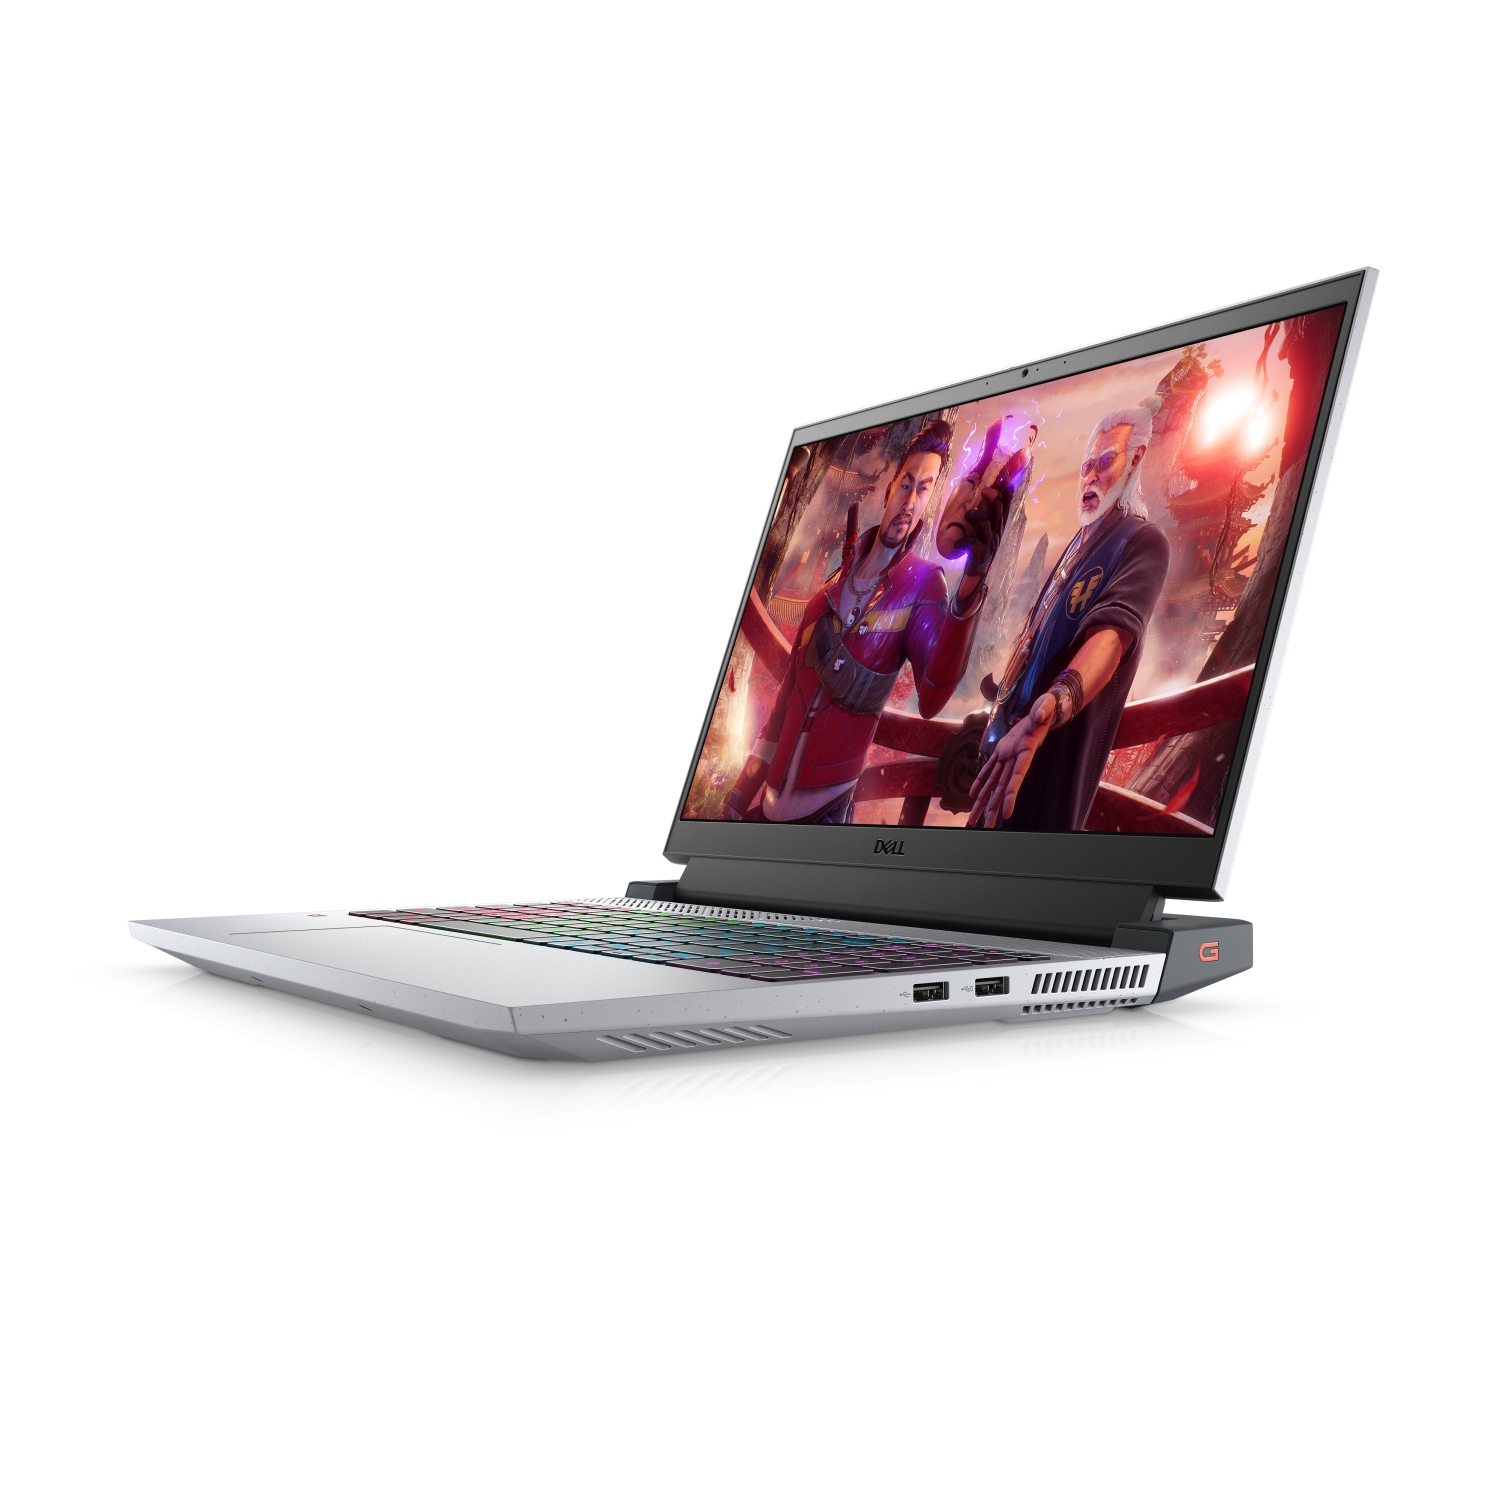 Refurbished (Excellent) – Dell G15 5515 Gaming Laptop (2021) | 15.6" FHD | Core Ryzen 5 - 512GB SSD - 8GB RAM - RTX 3050 | 6 Cores @ 4.6 GHz